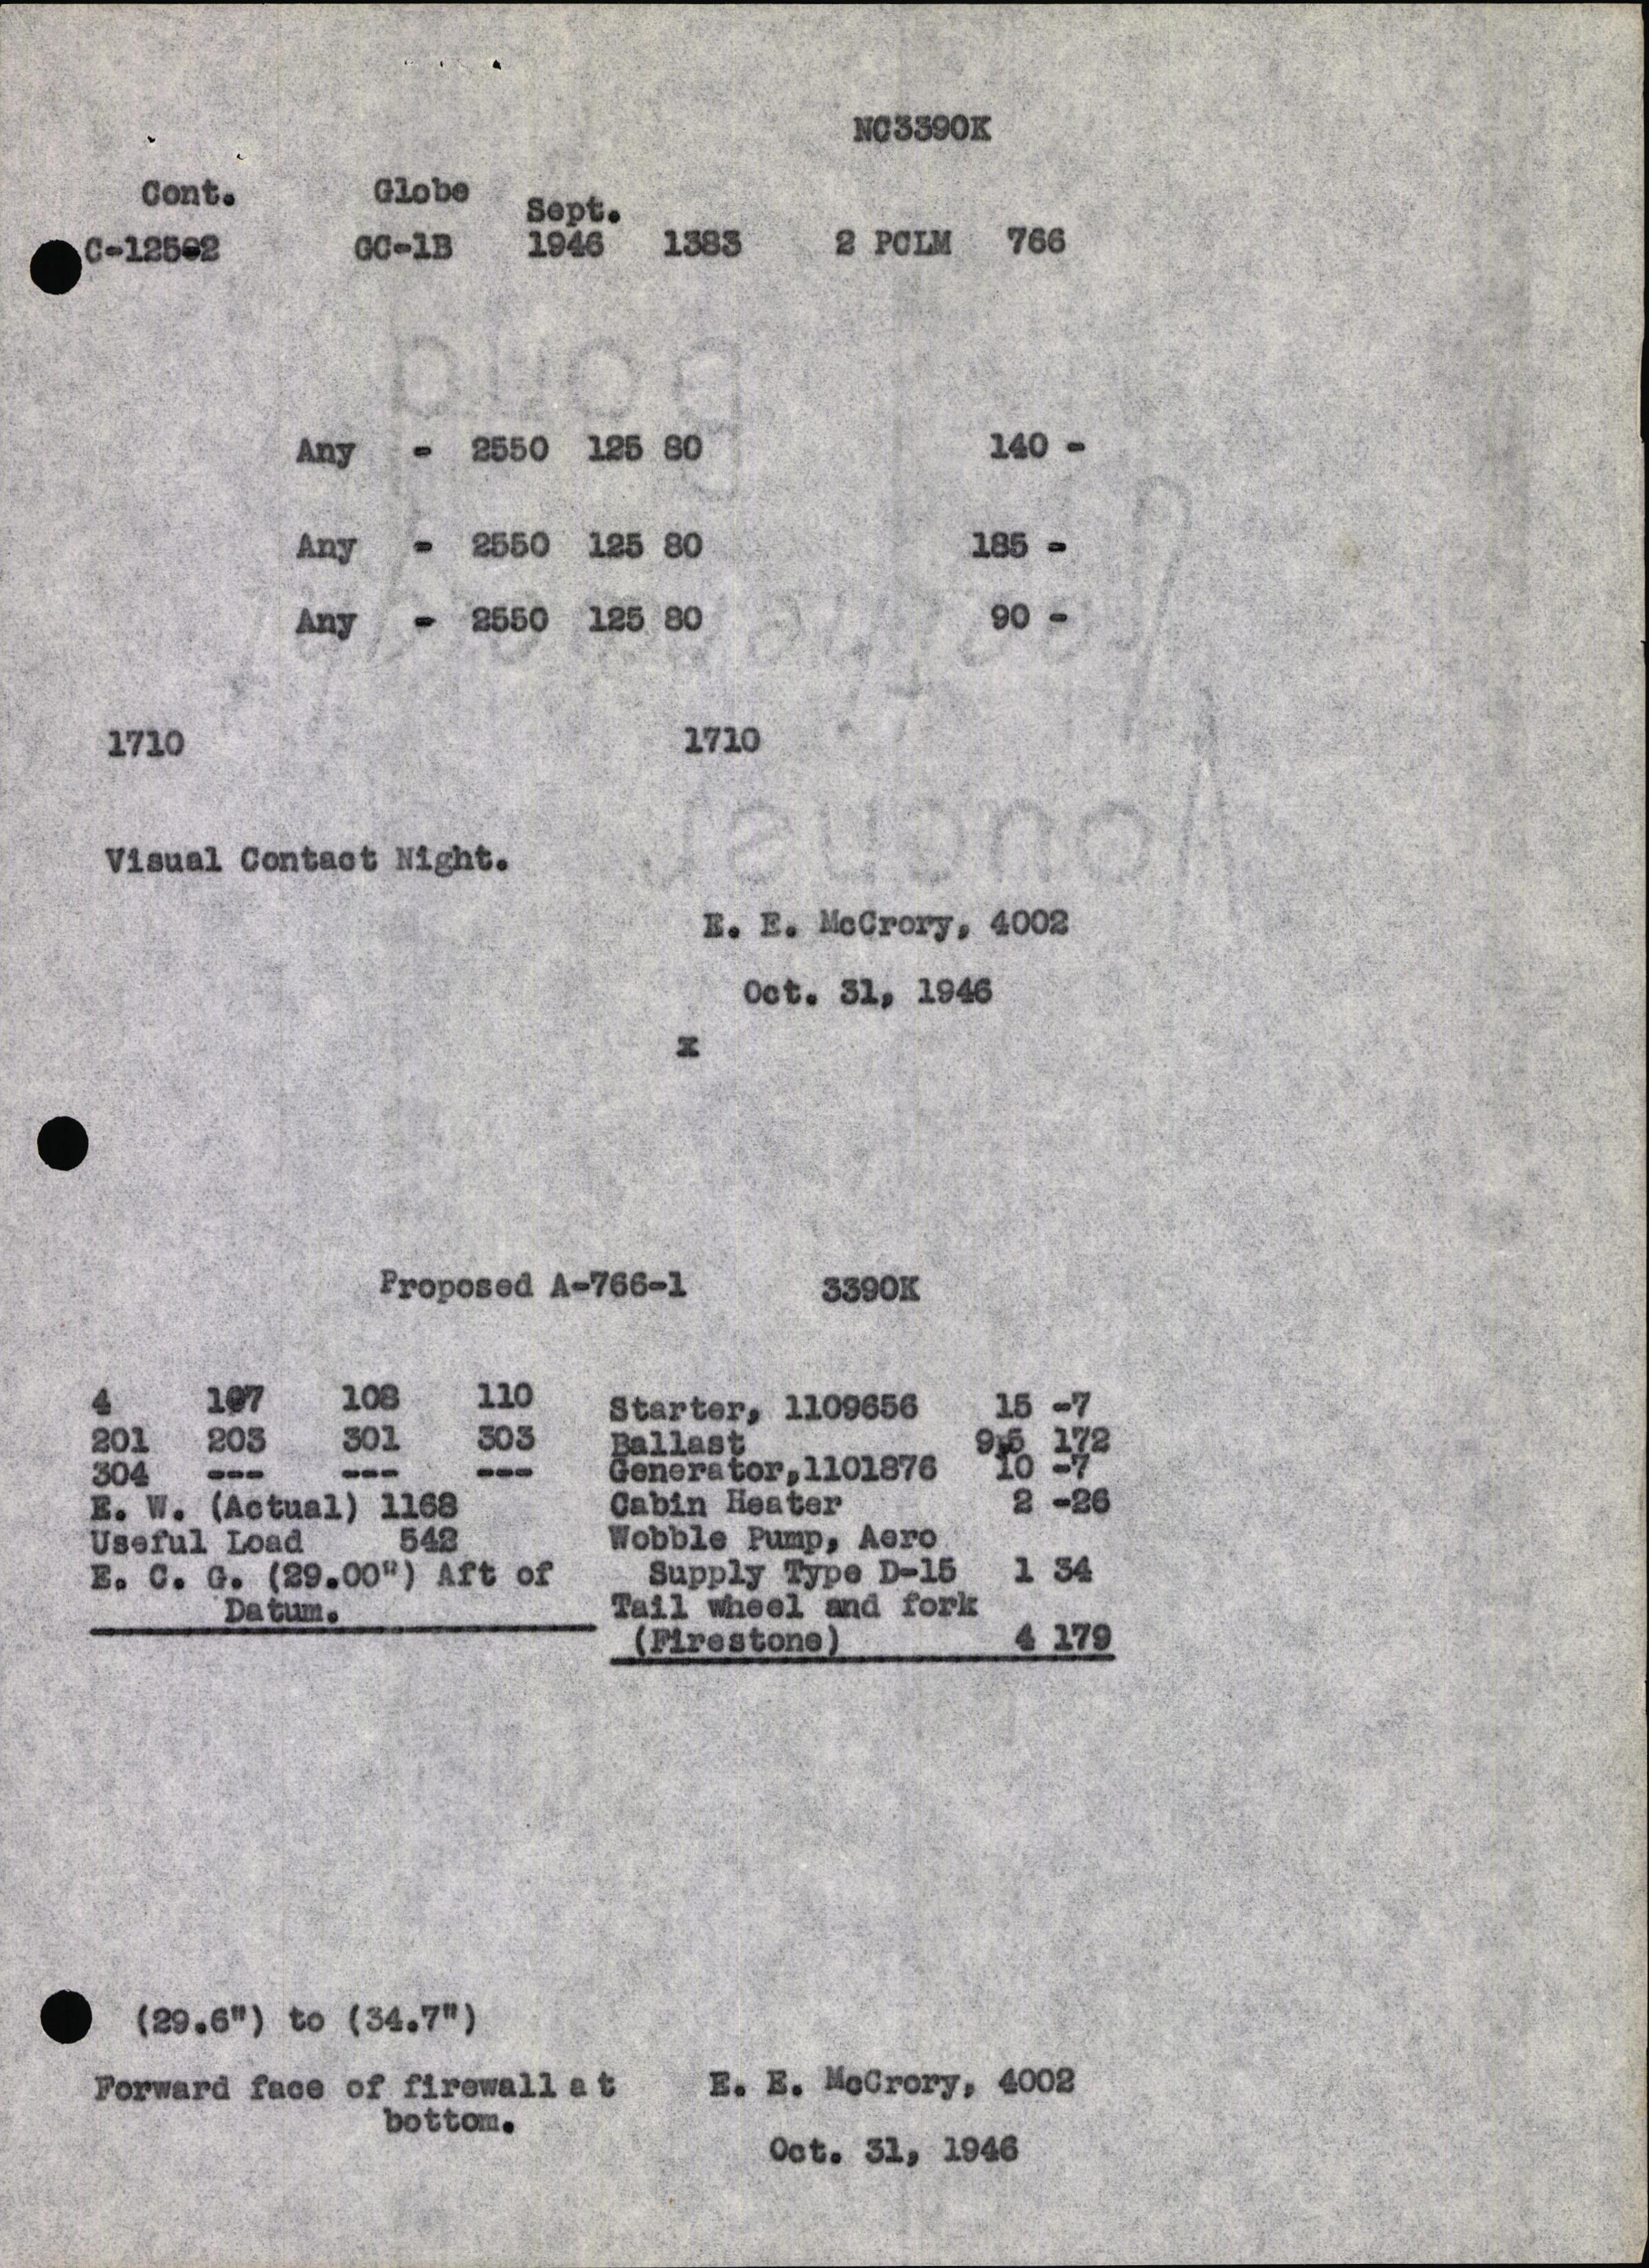 Sample page 7 from AirCorps Library document: Technical Information for Serial Number 1383